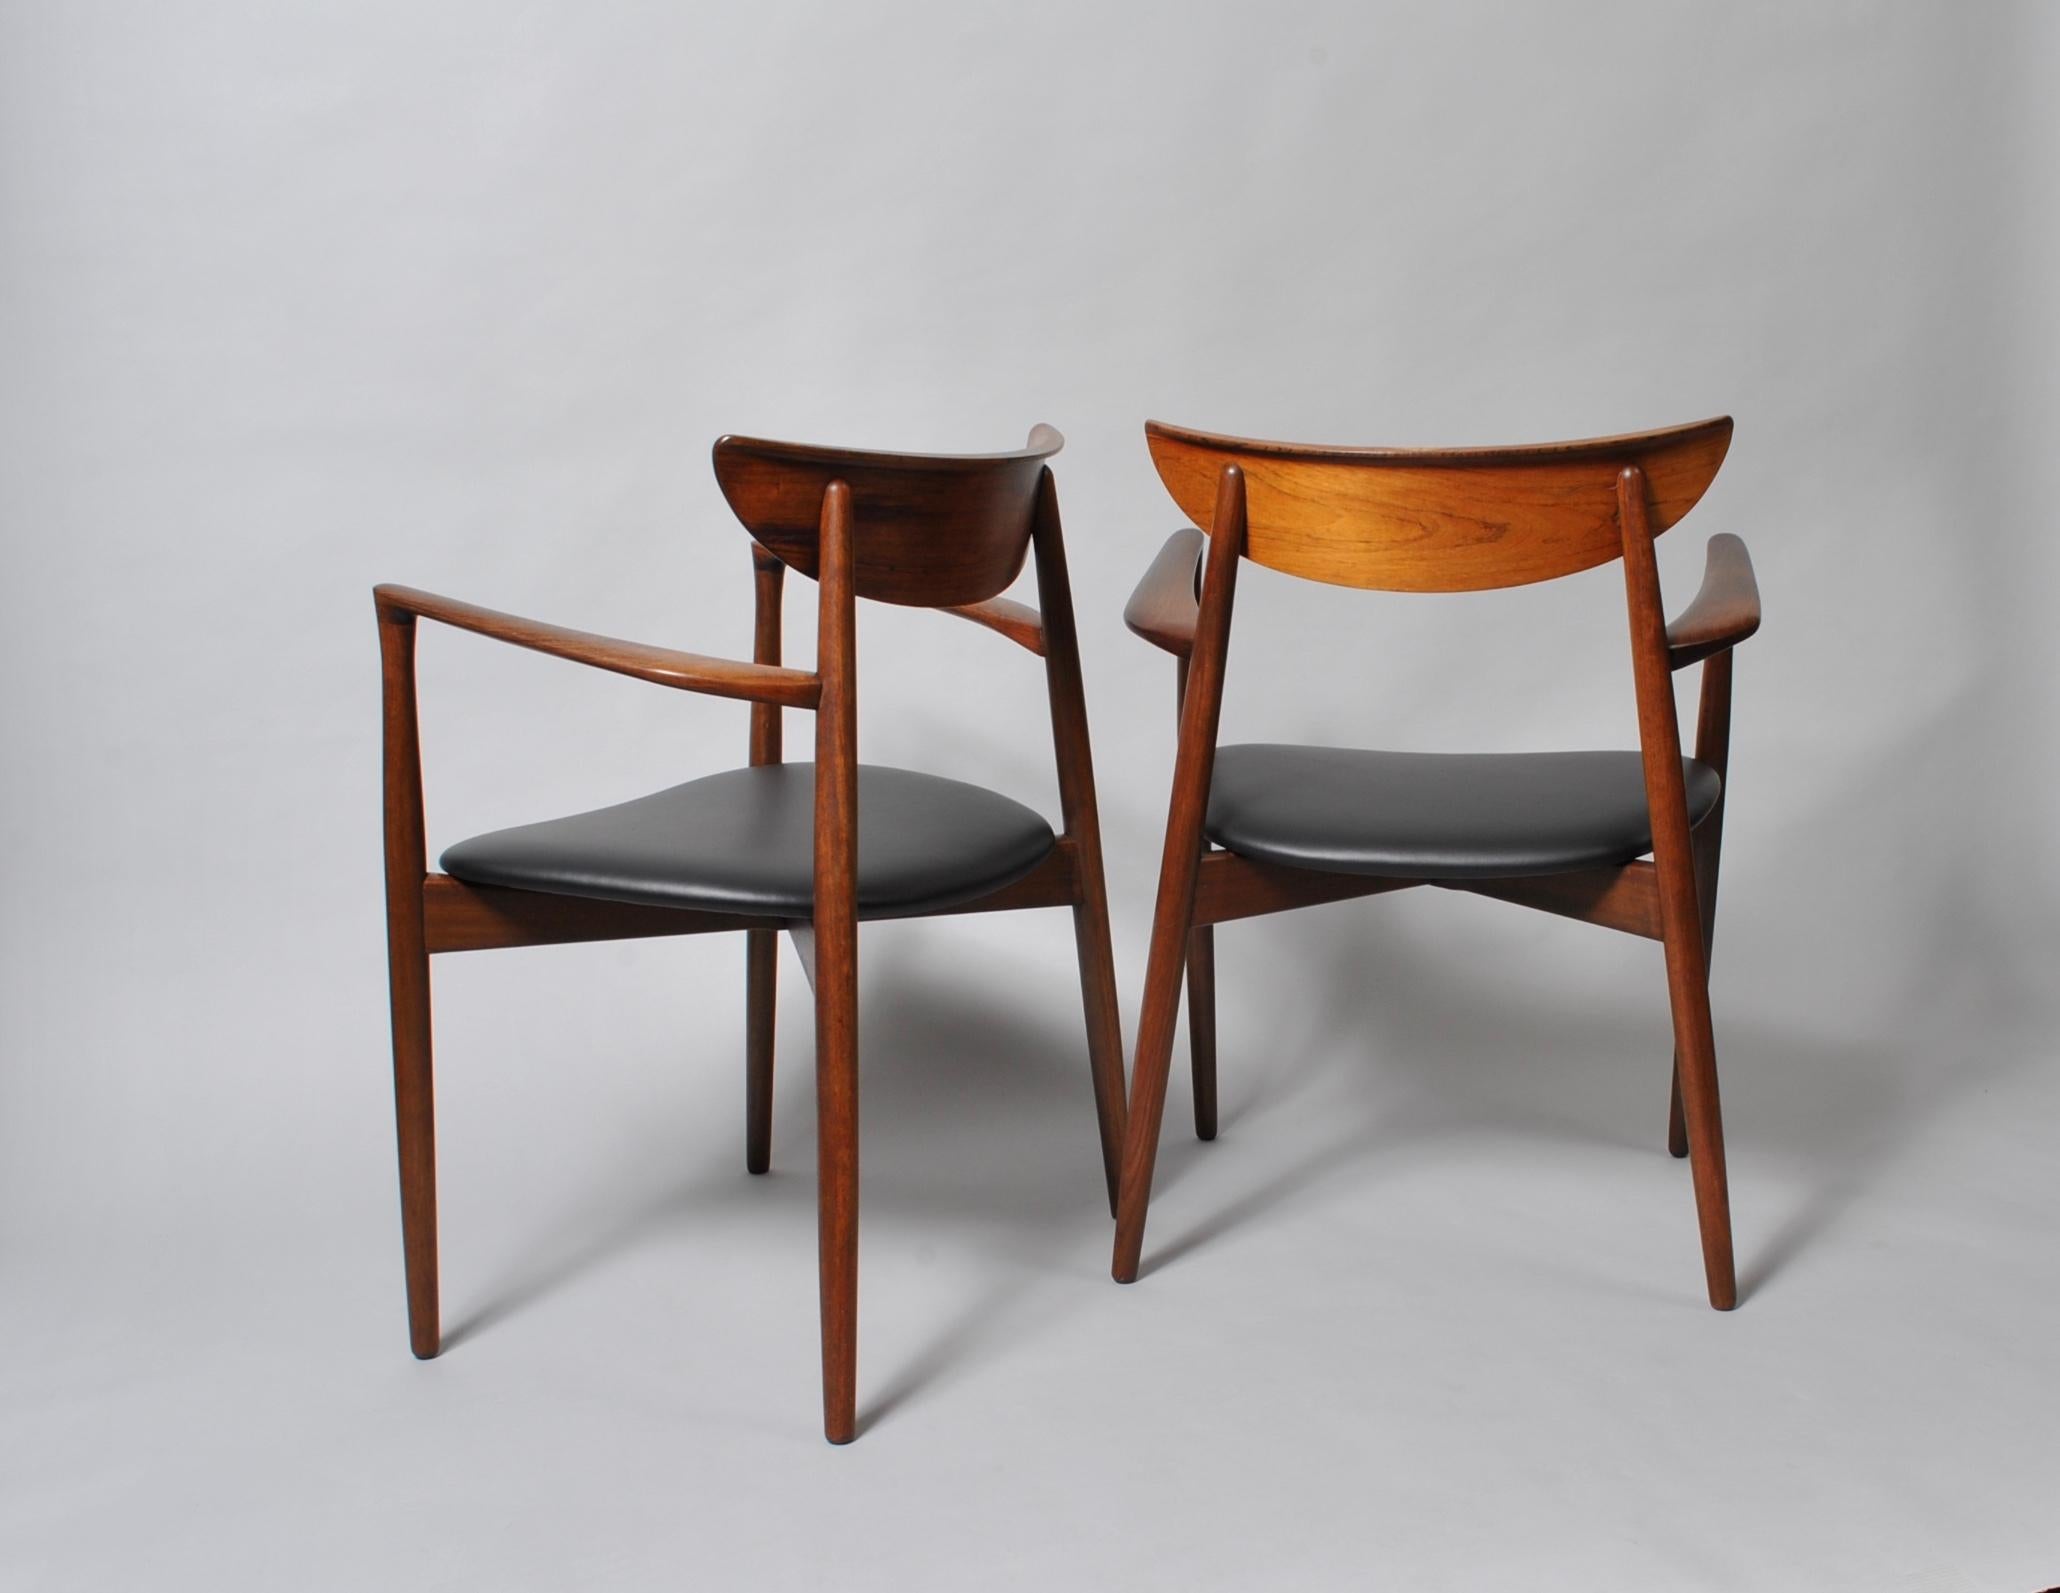 Harry Ostergaard, Pair of Midcentury Chairs 1